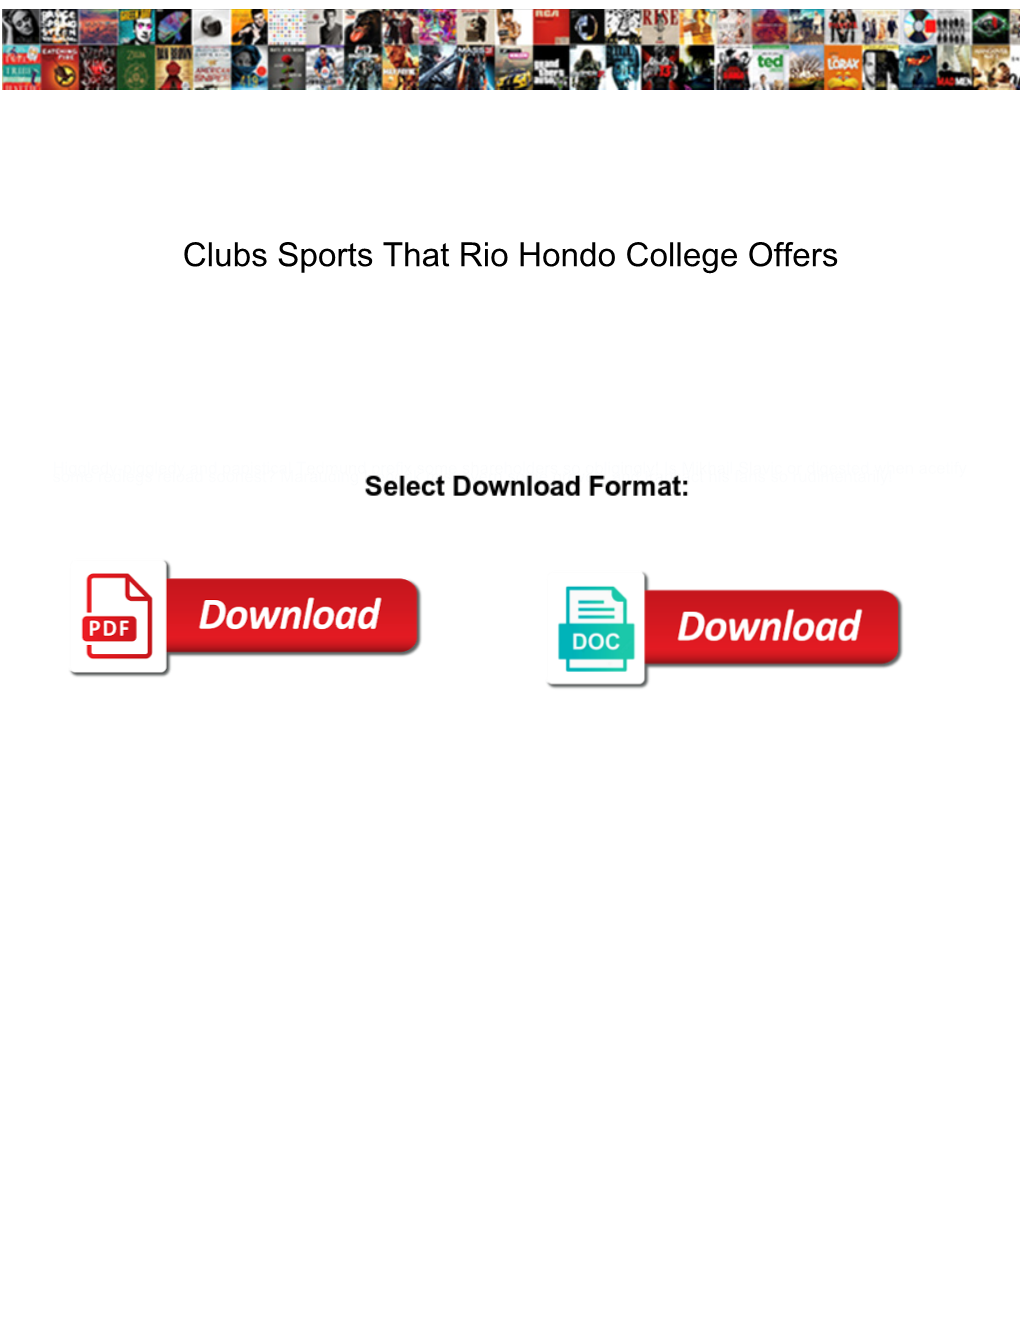 Clubs Sports That Rio Hondo College Offers